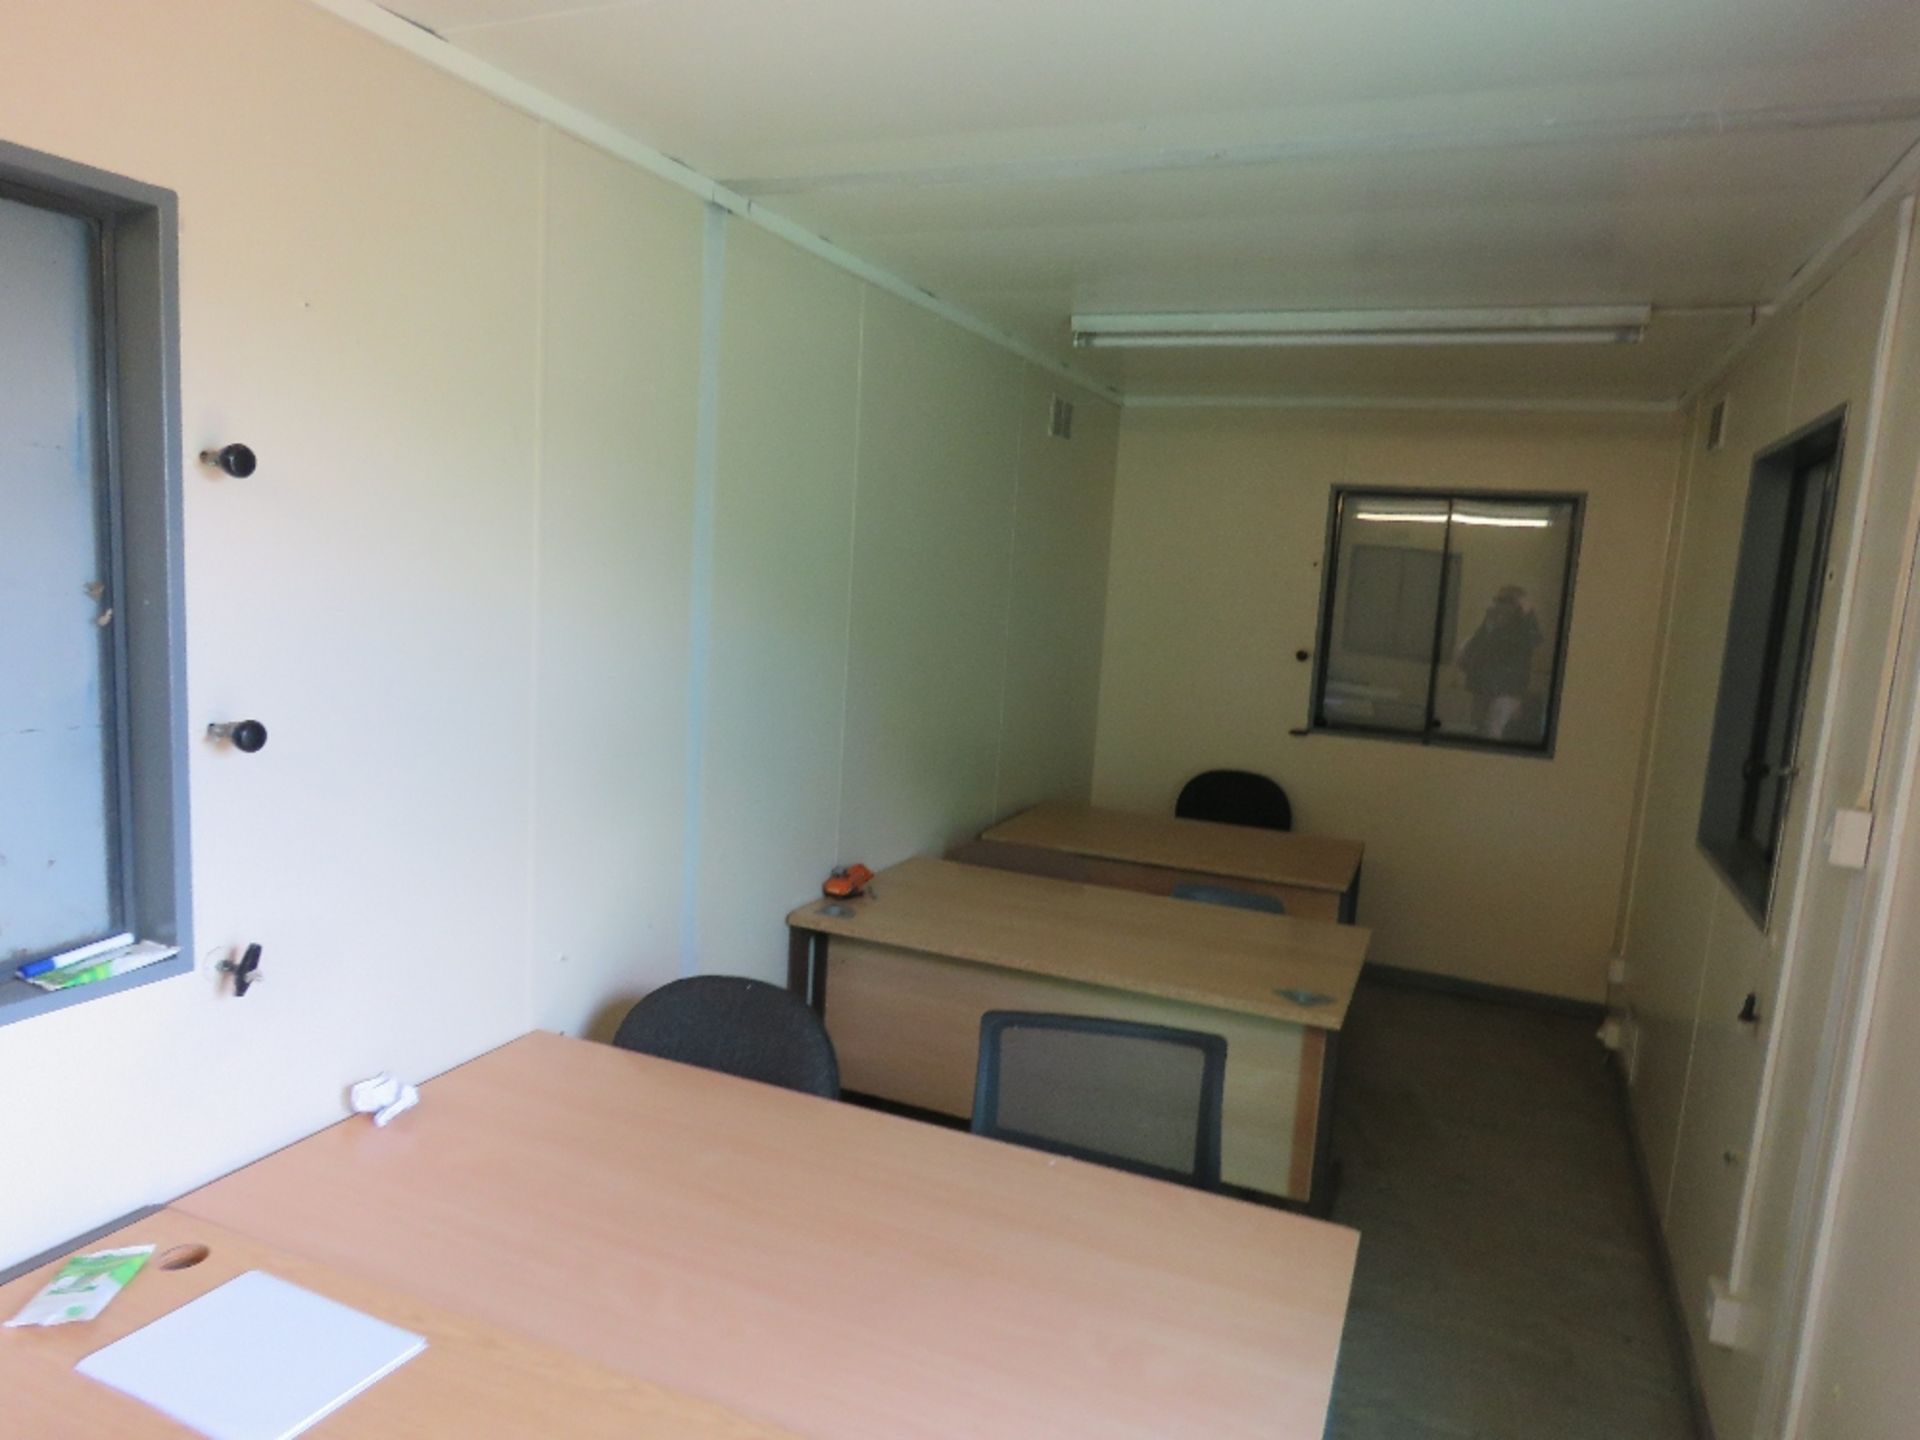 PORTABLE SITE OFFICE 24FT X 8FT APPROX OPEN PLAN AS SHOWN.. INCLUDES SOME FURNITURE. BEING SOLD ON B - Image 4 of 7